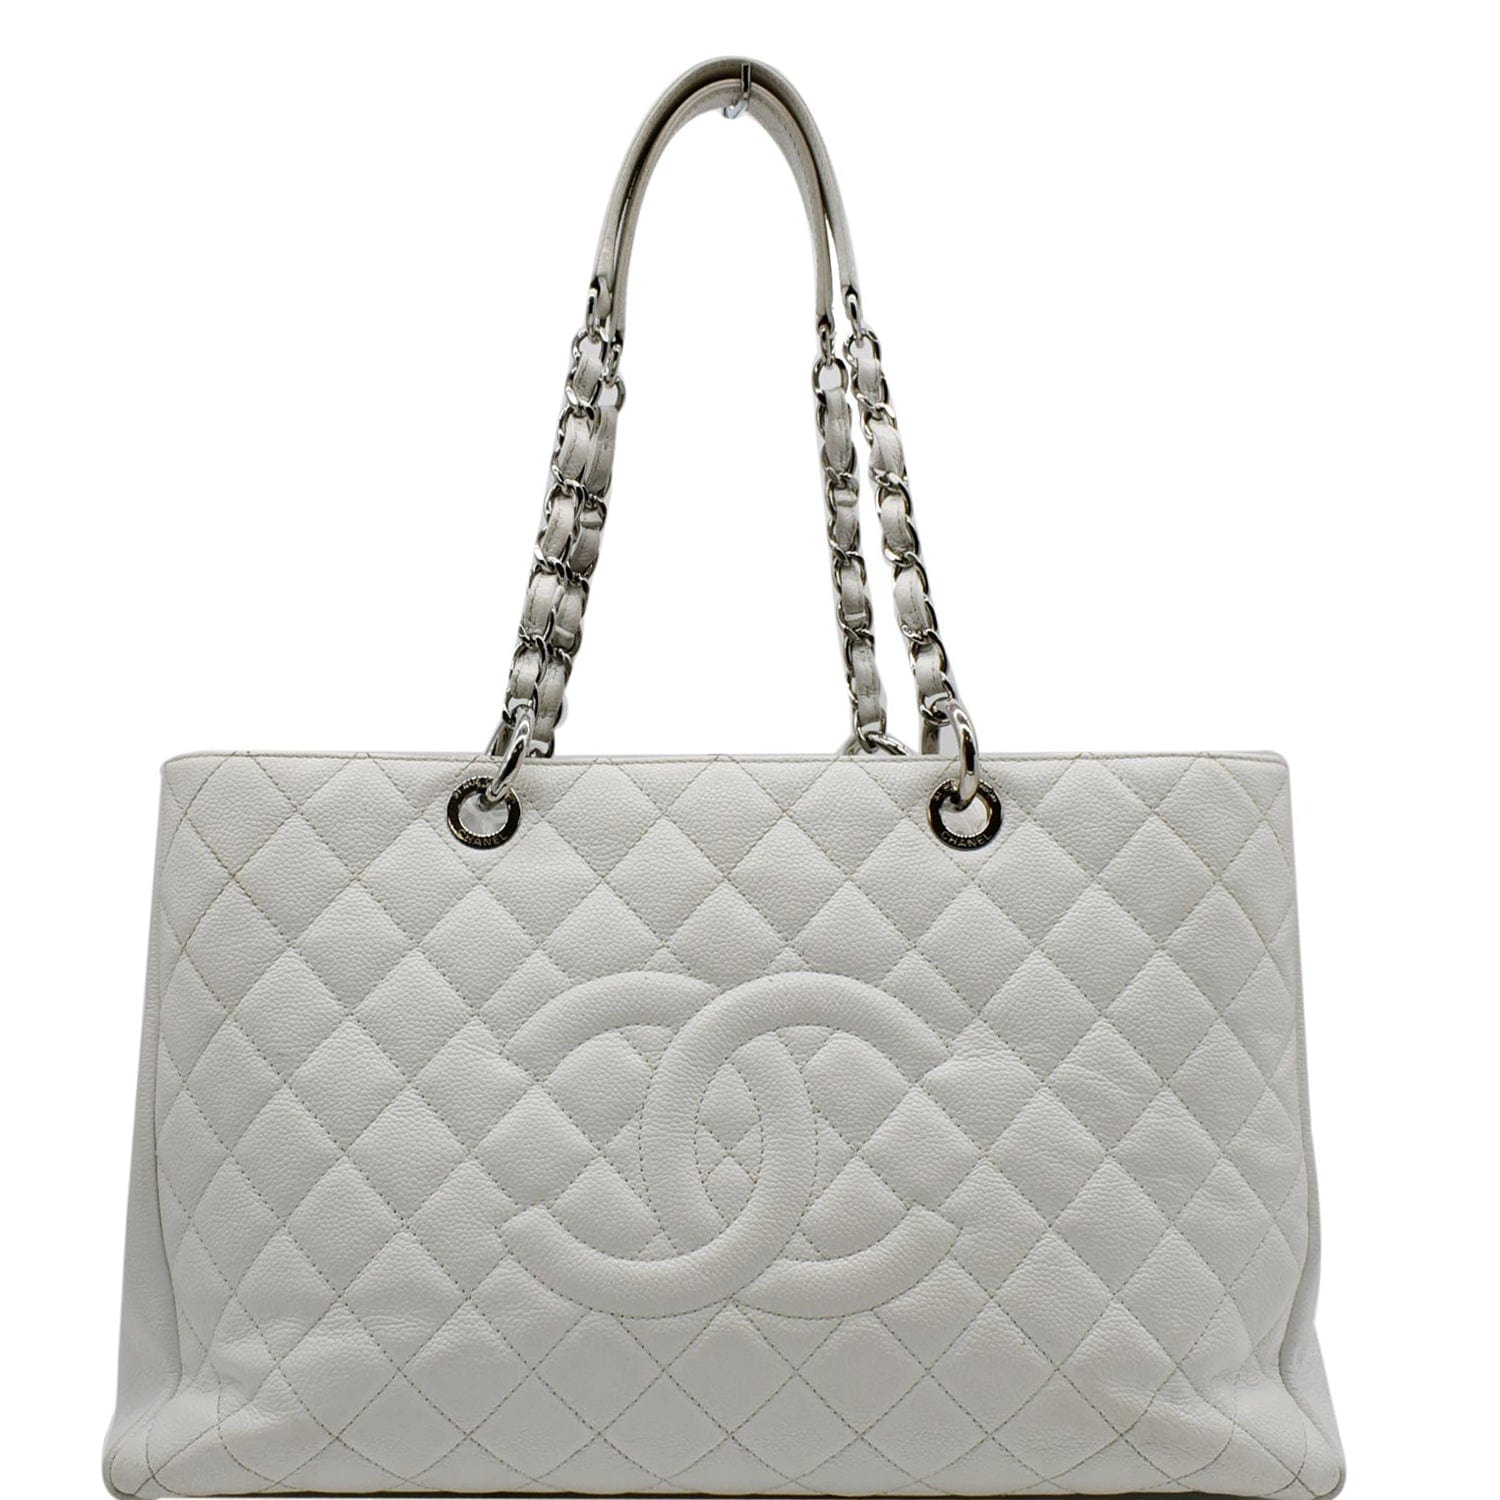 CHANEL Calfskin Quilted Small Shopping Tote Black | FASHIONPHILE